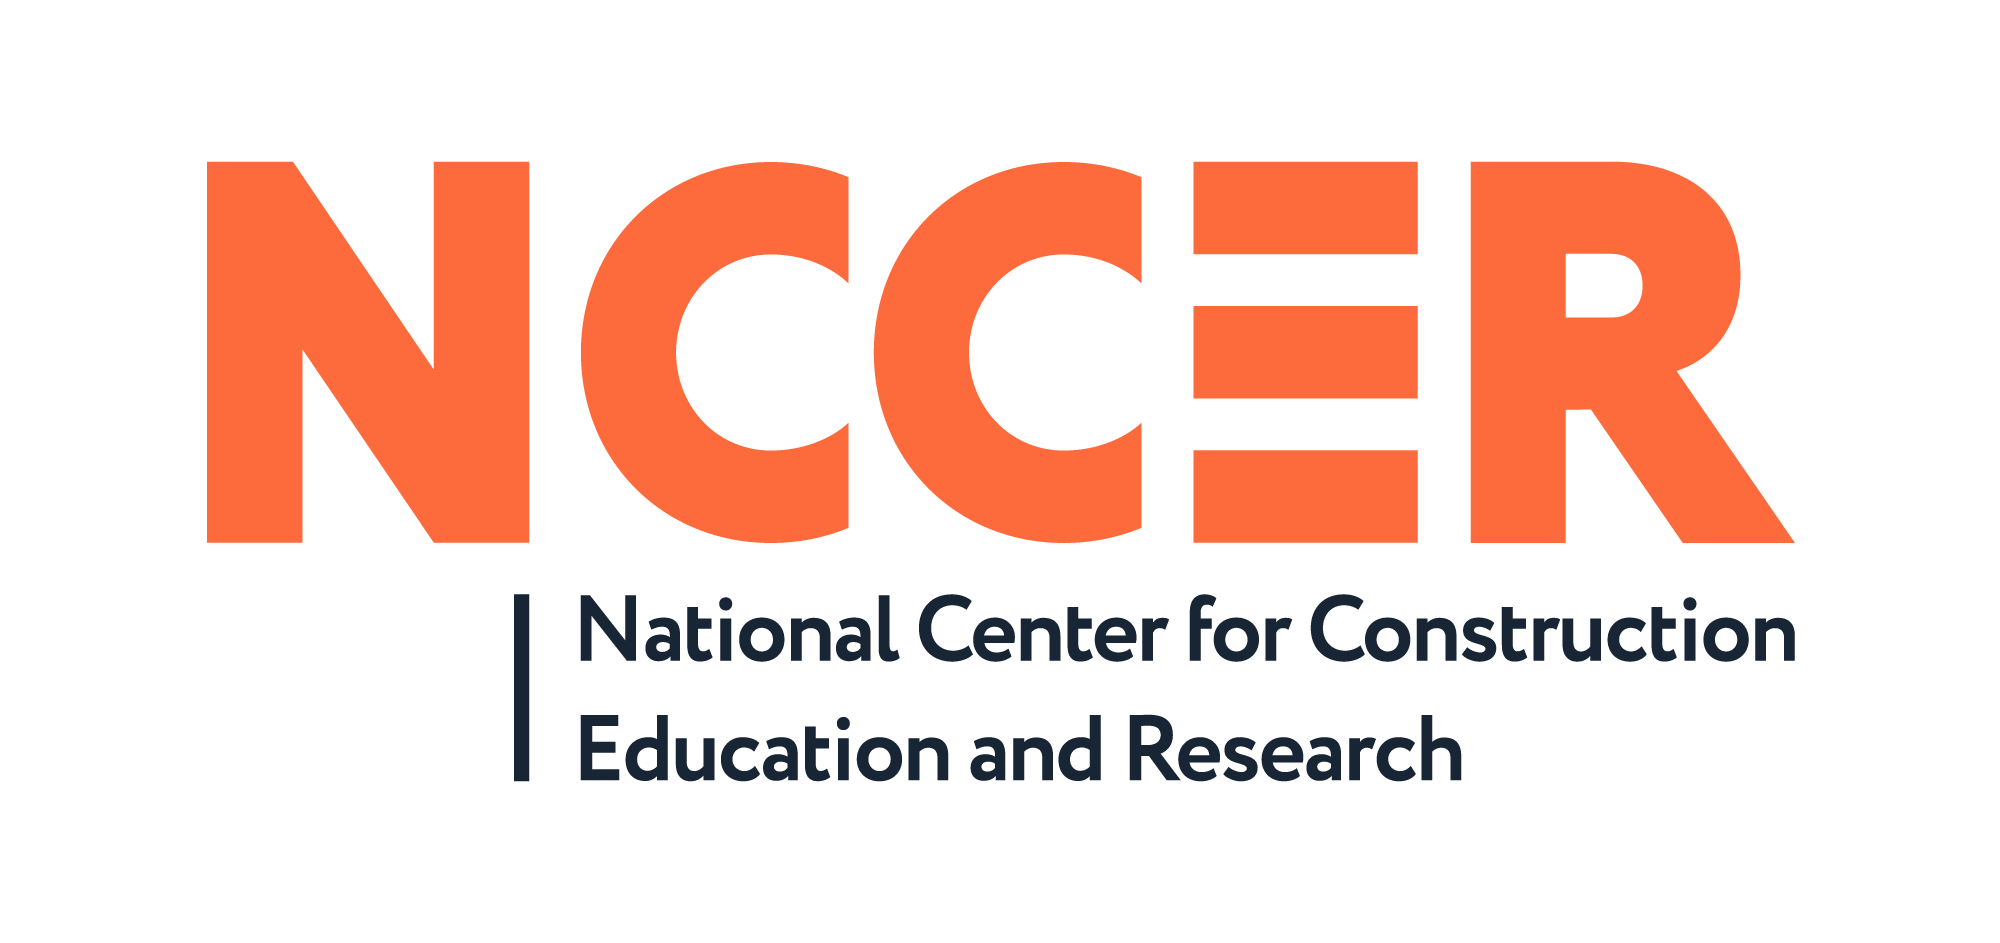 The National Center for Construction Education and Research (NCCER)